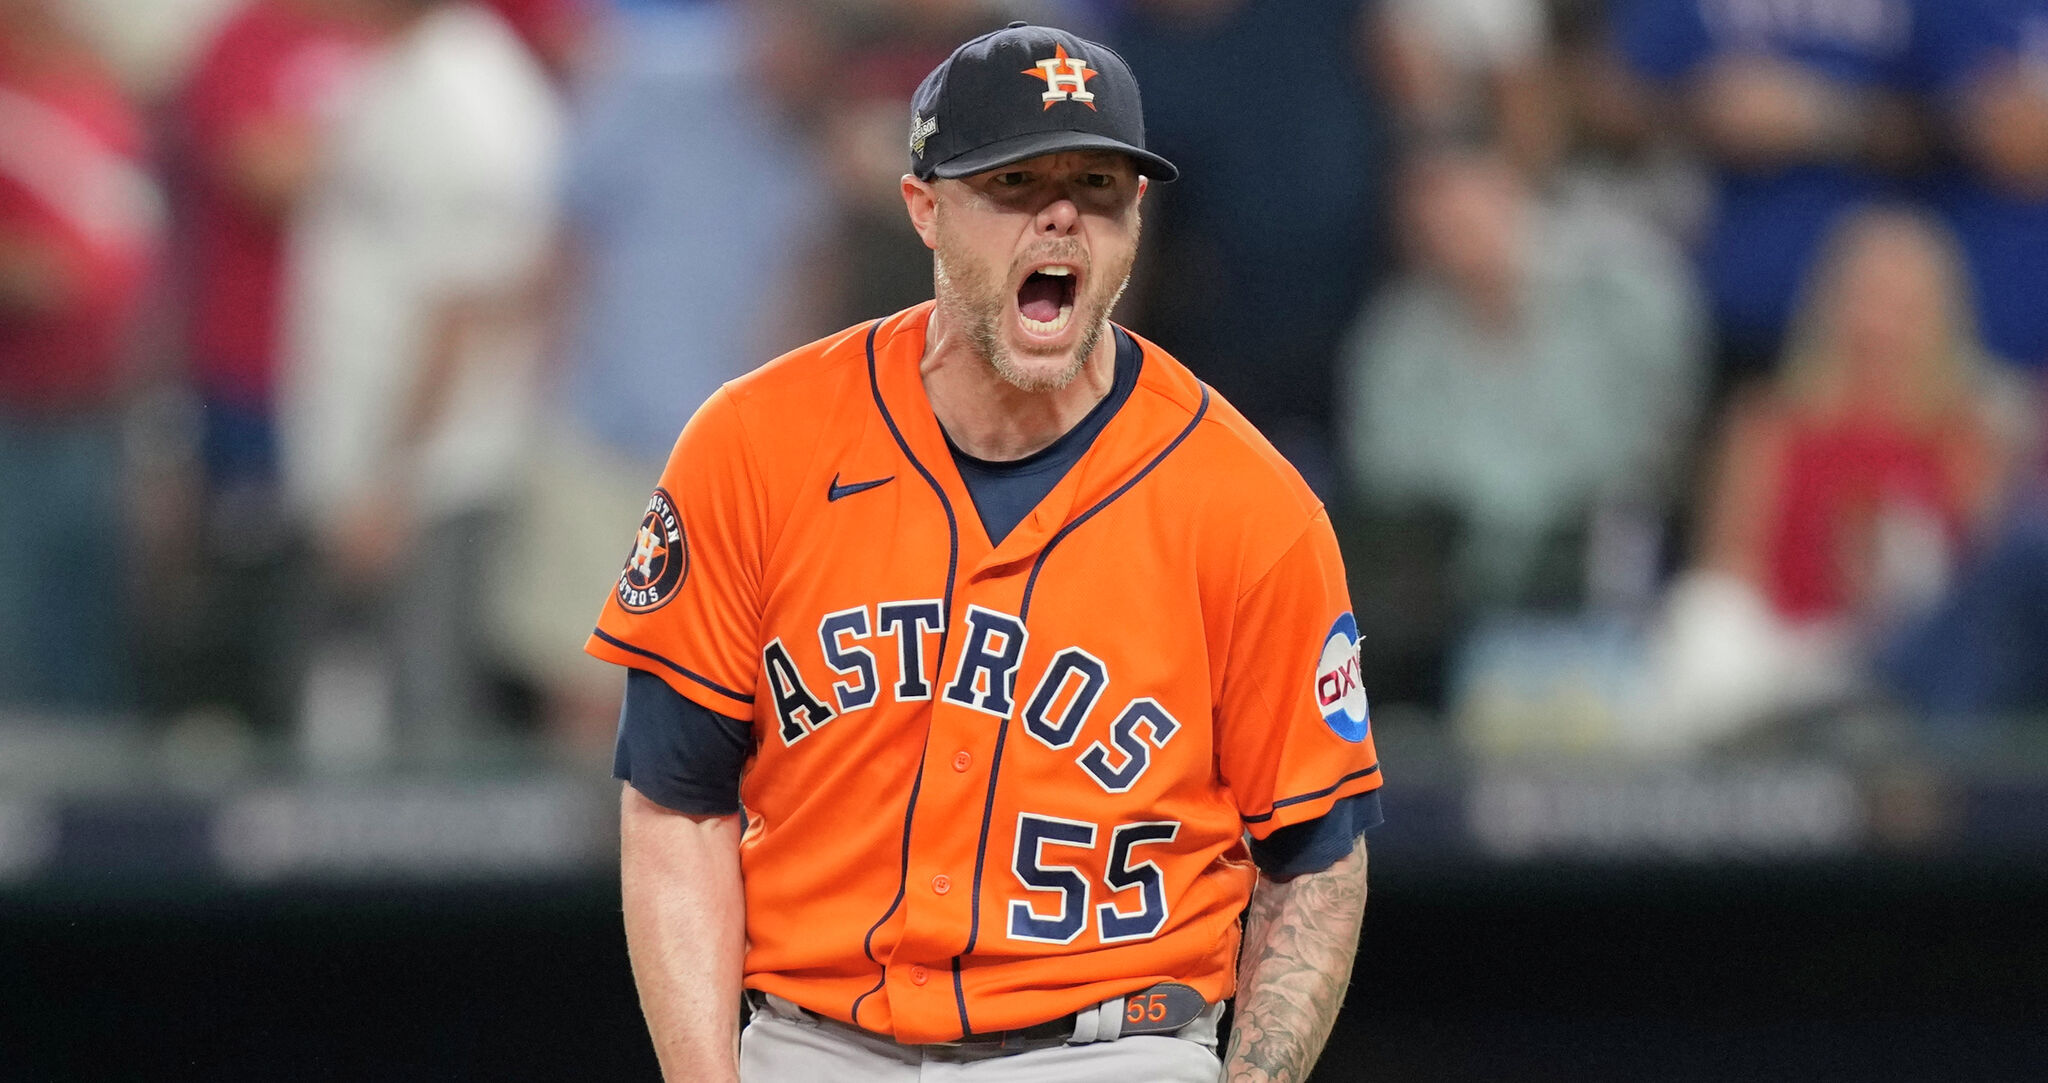 Houston Astros: Ryan Pressly 'excited' for playoff games in Minnesota